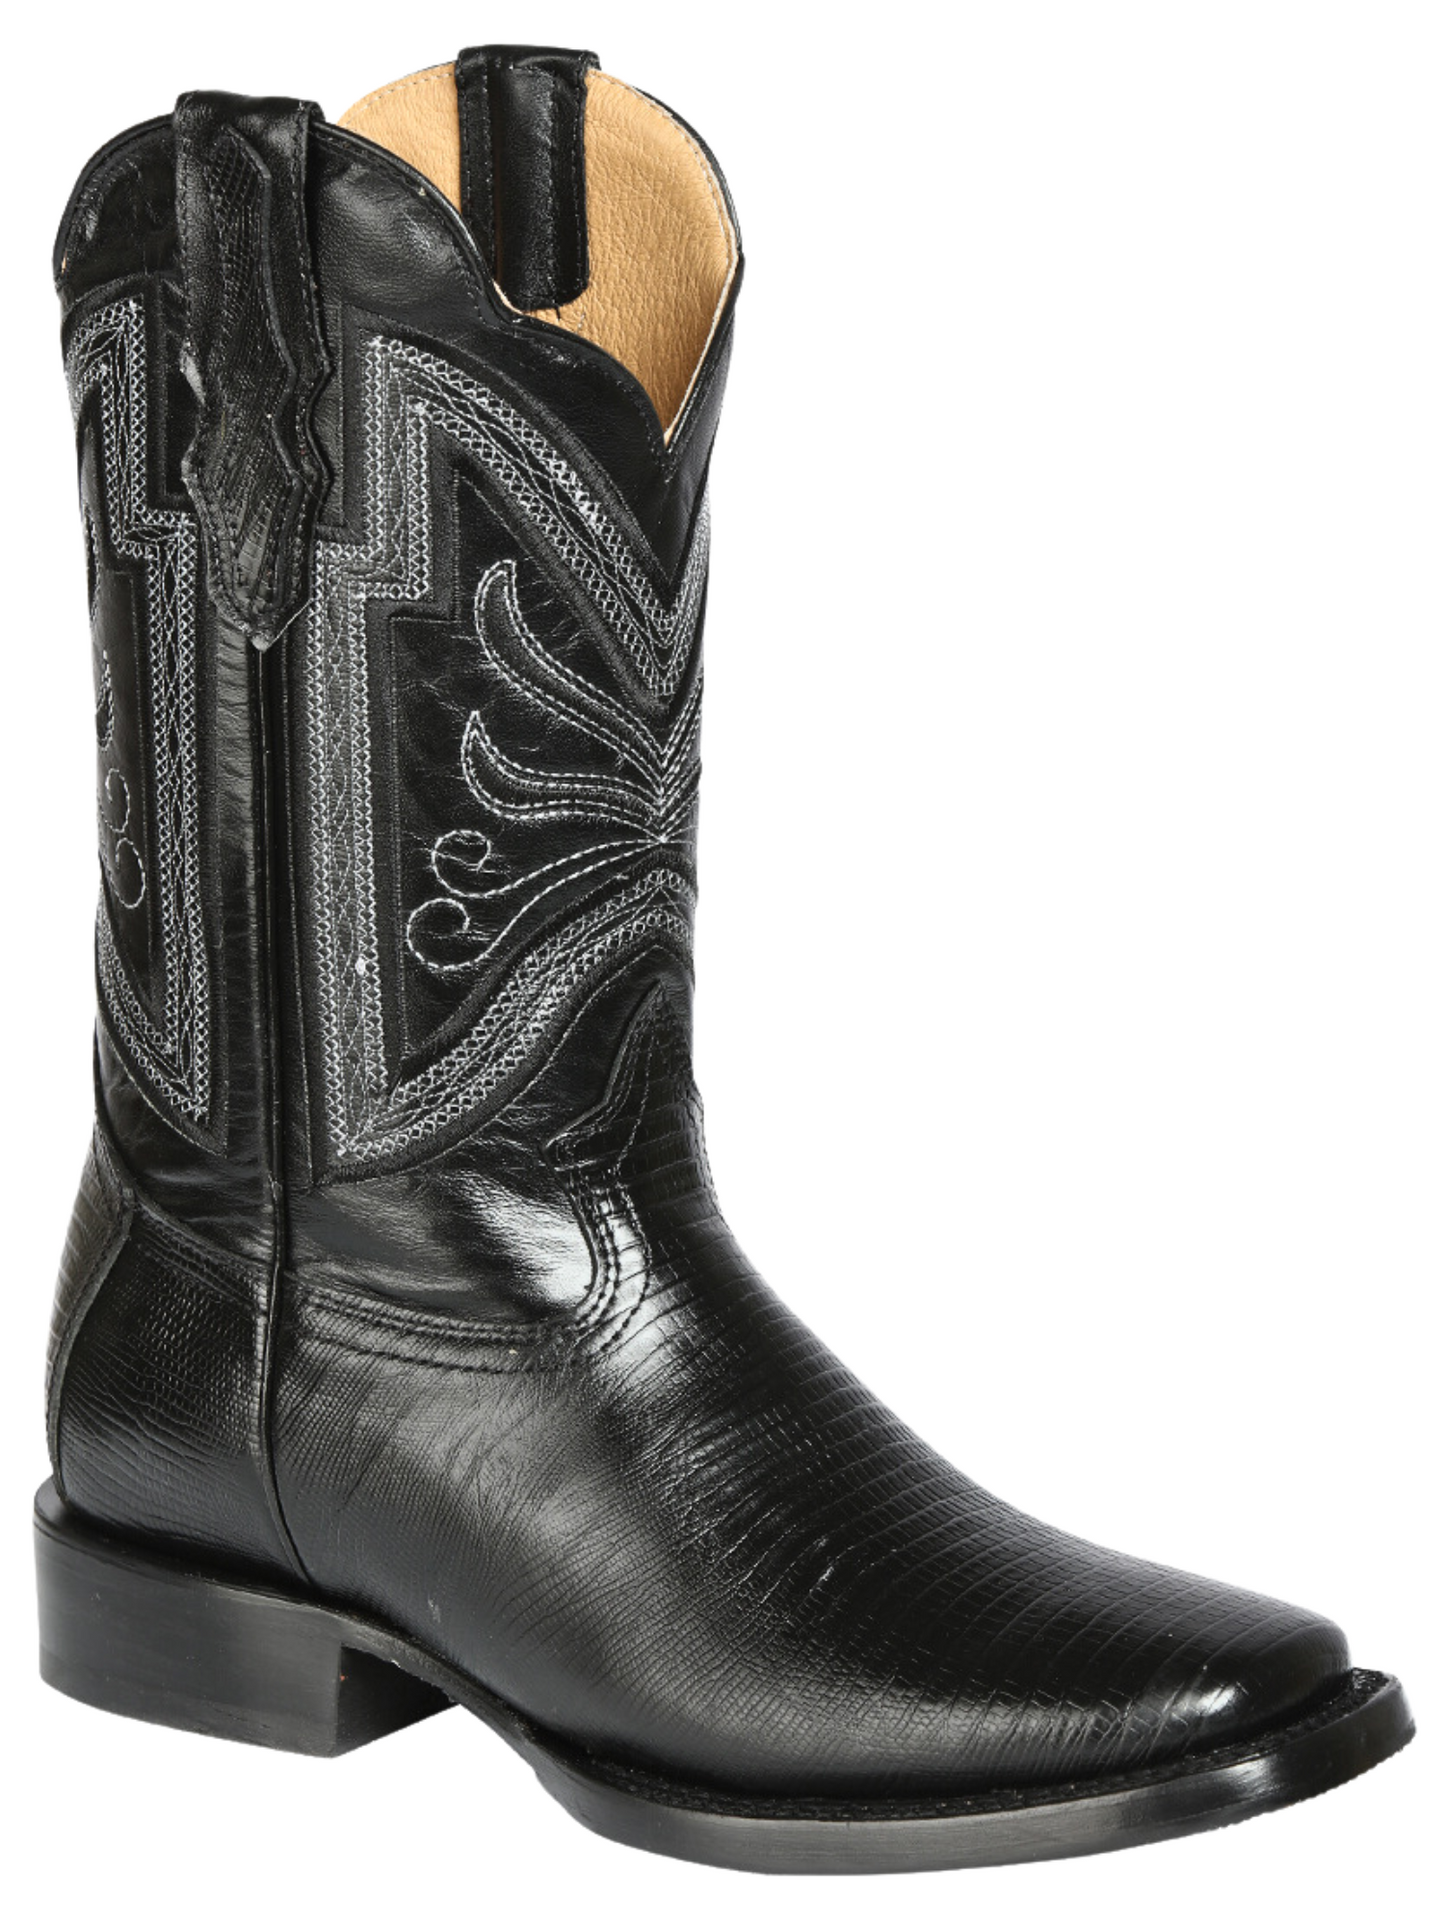 Rodeo Cowboy Boots Imitation of Lizard Engraved in Cowhide Leather for Men 'El General' - ID: 44666 Cowboy Boots El General